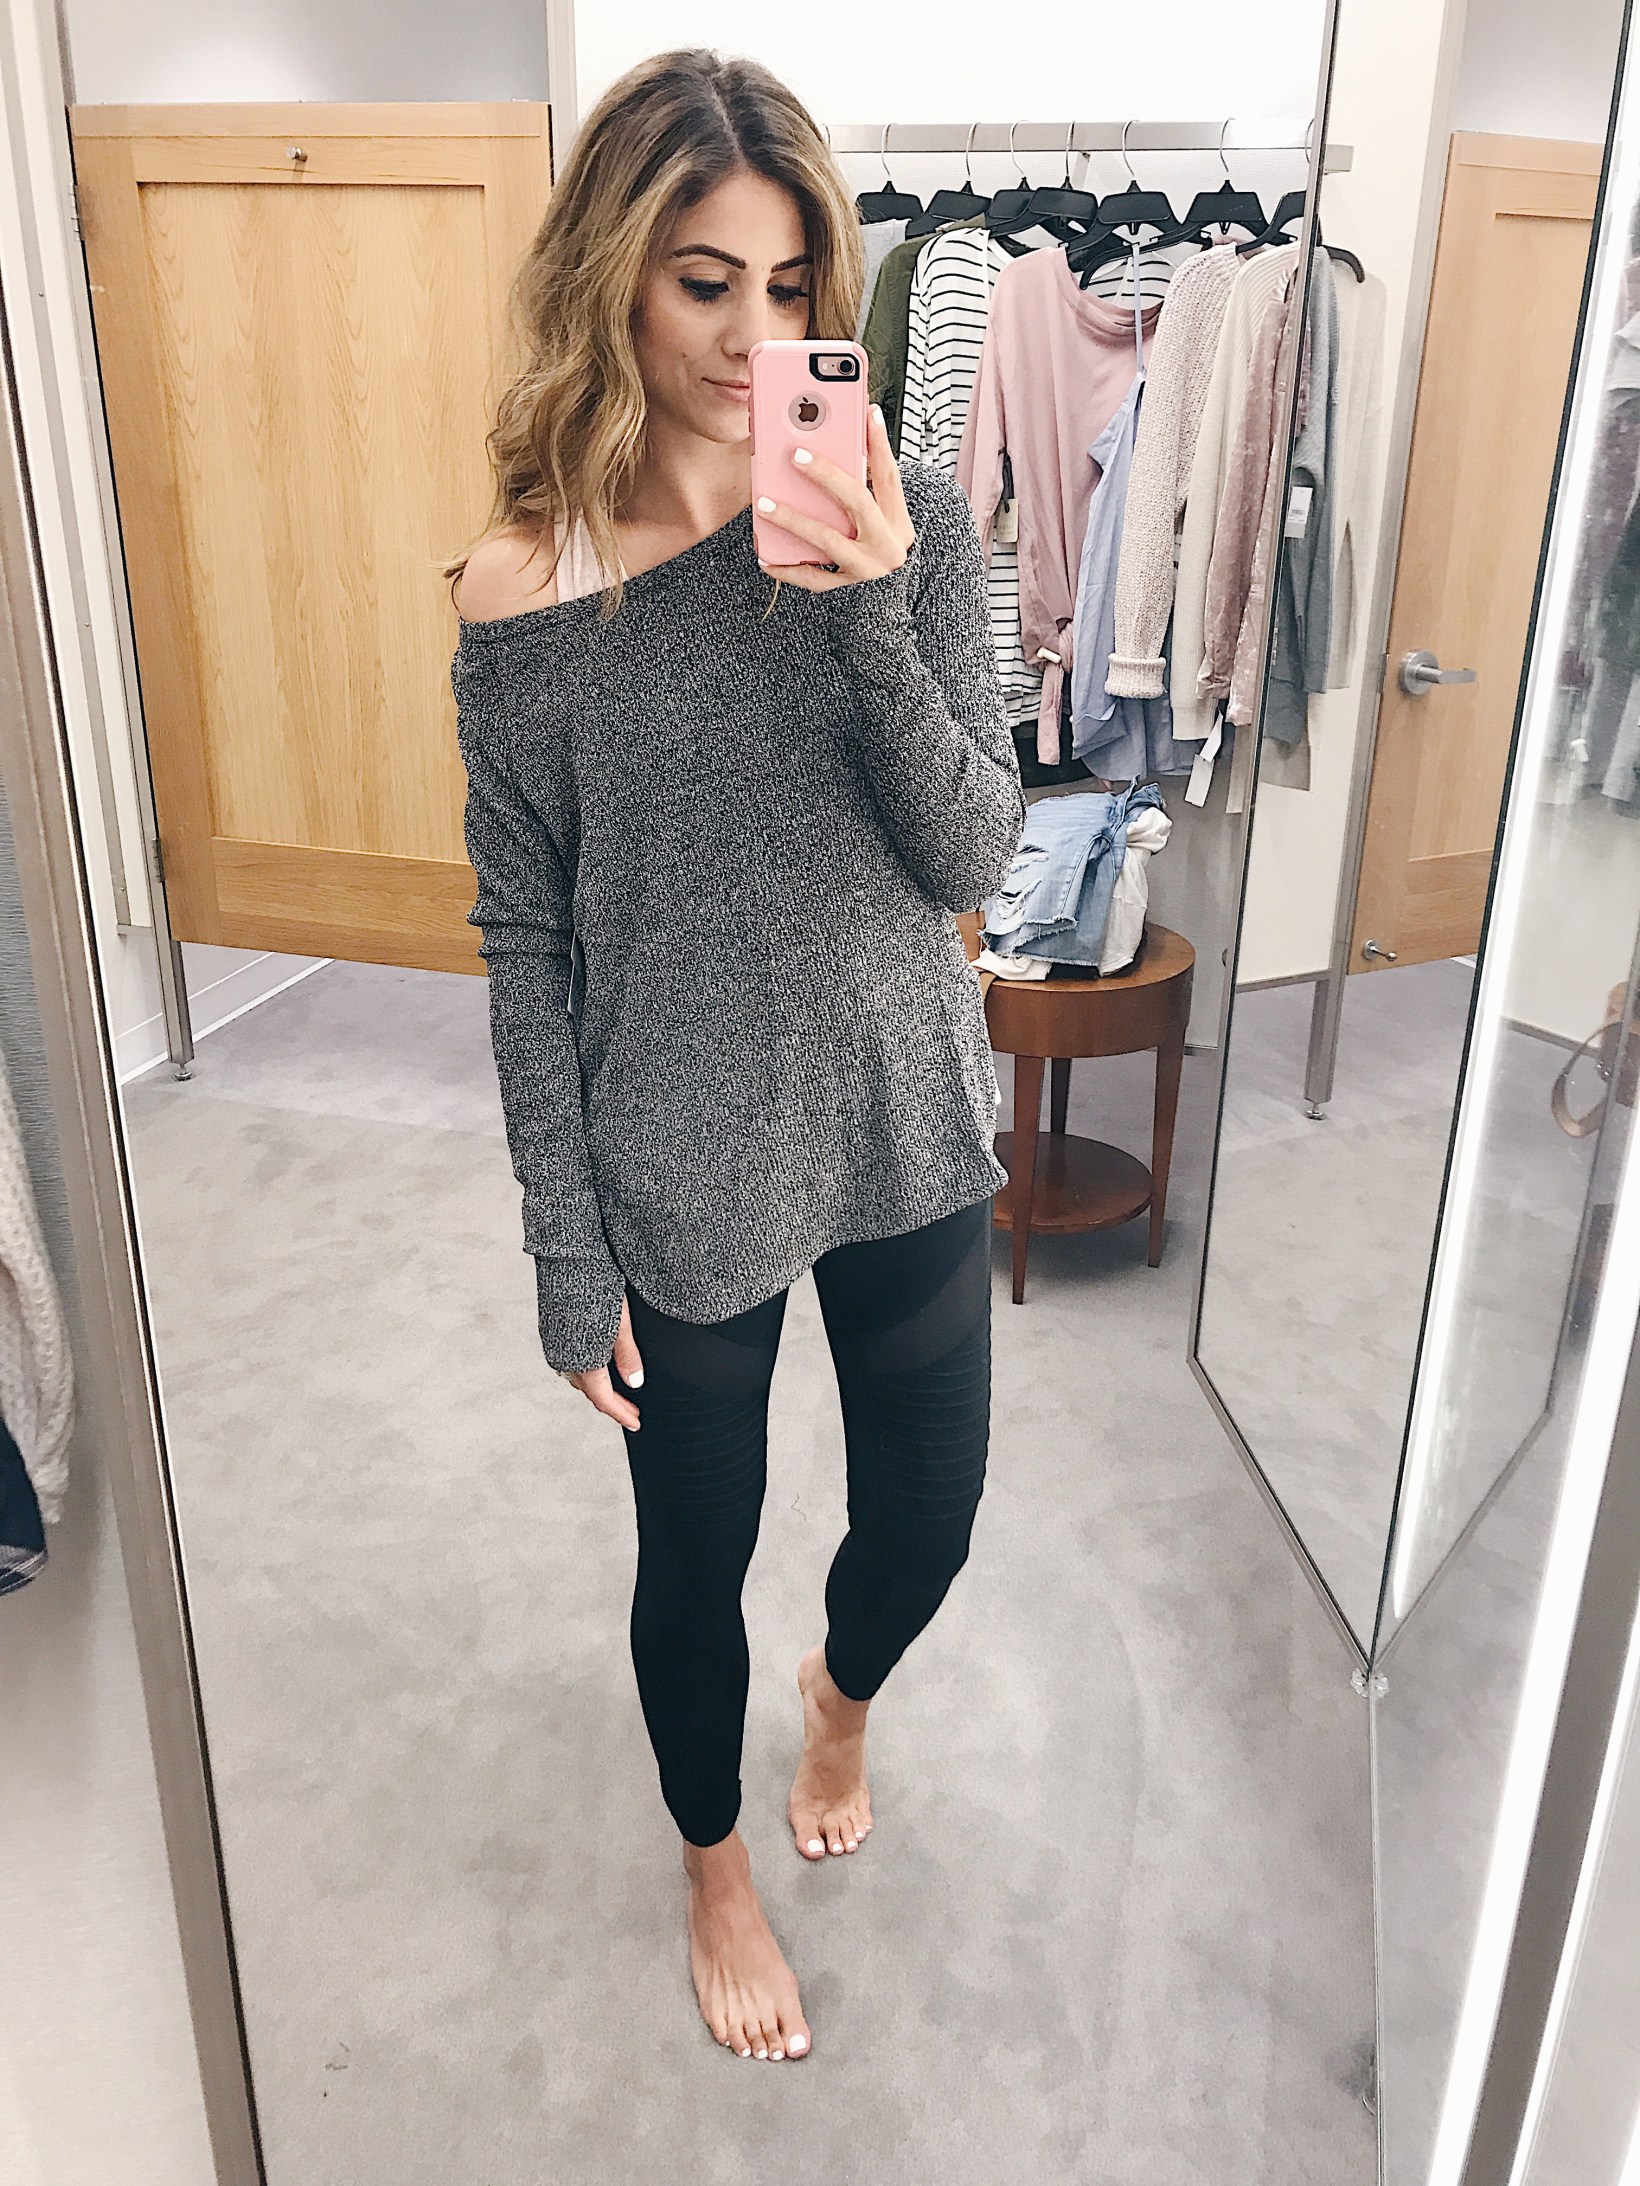 Life and style blogger Lauren McBride shares her top loved items from the year 2017.